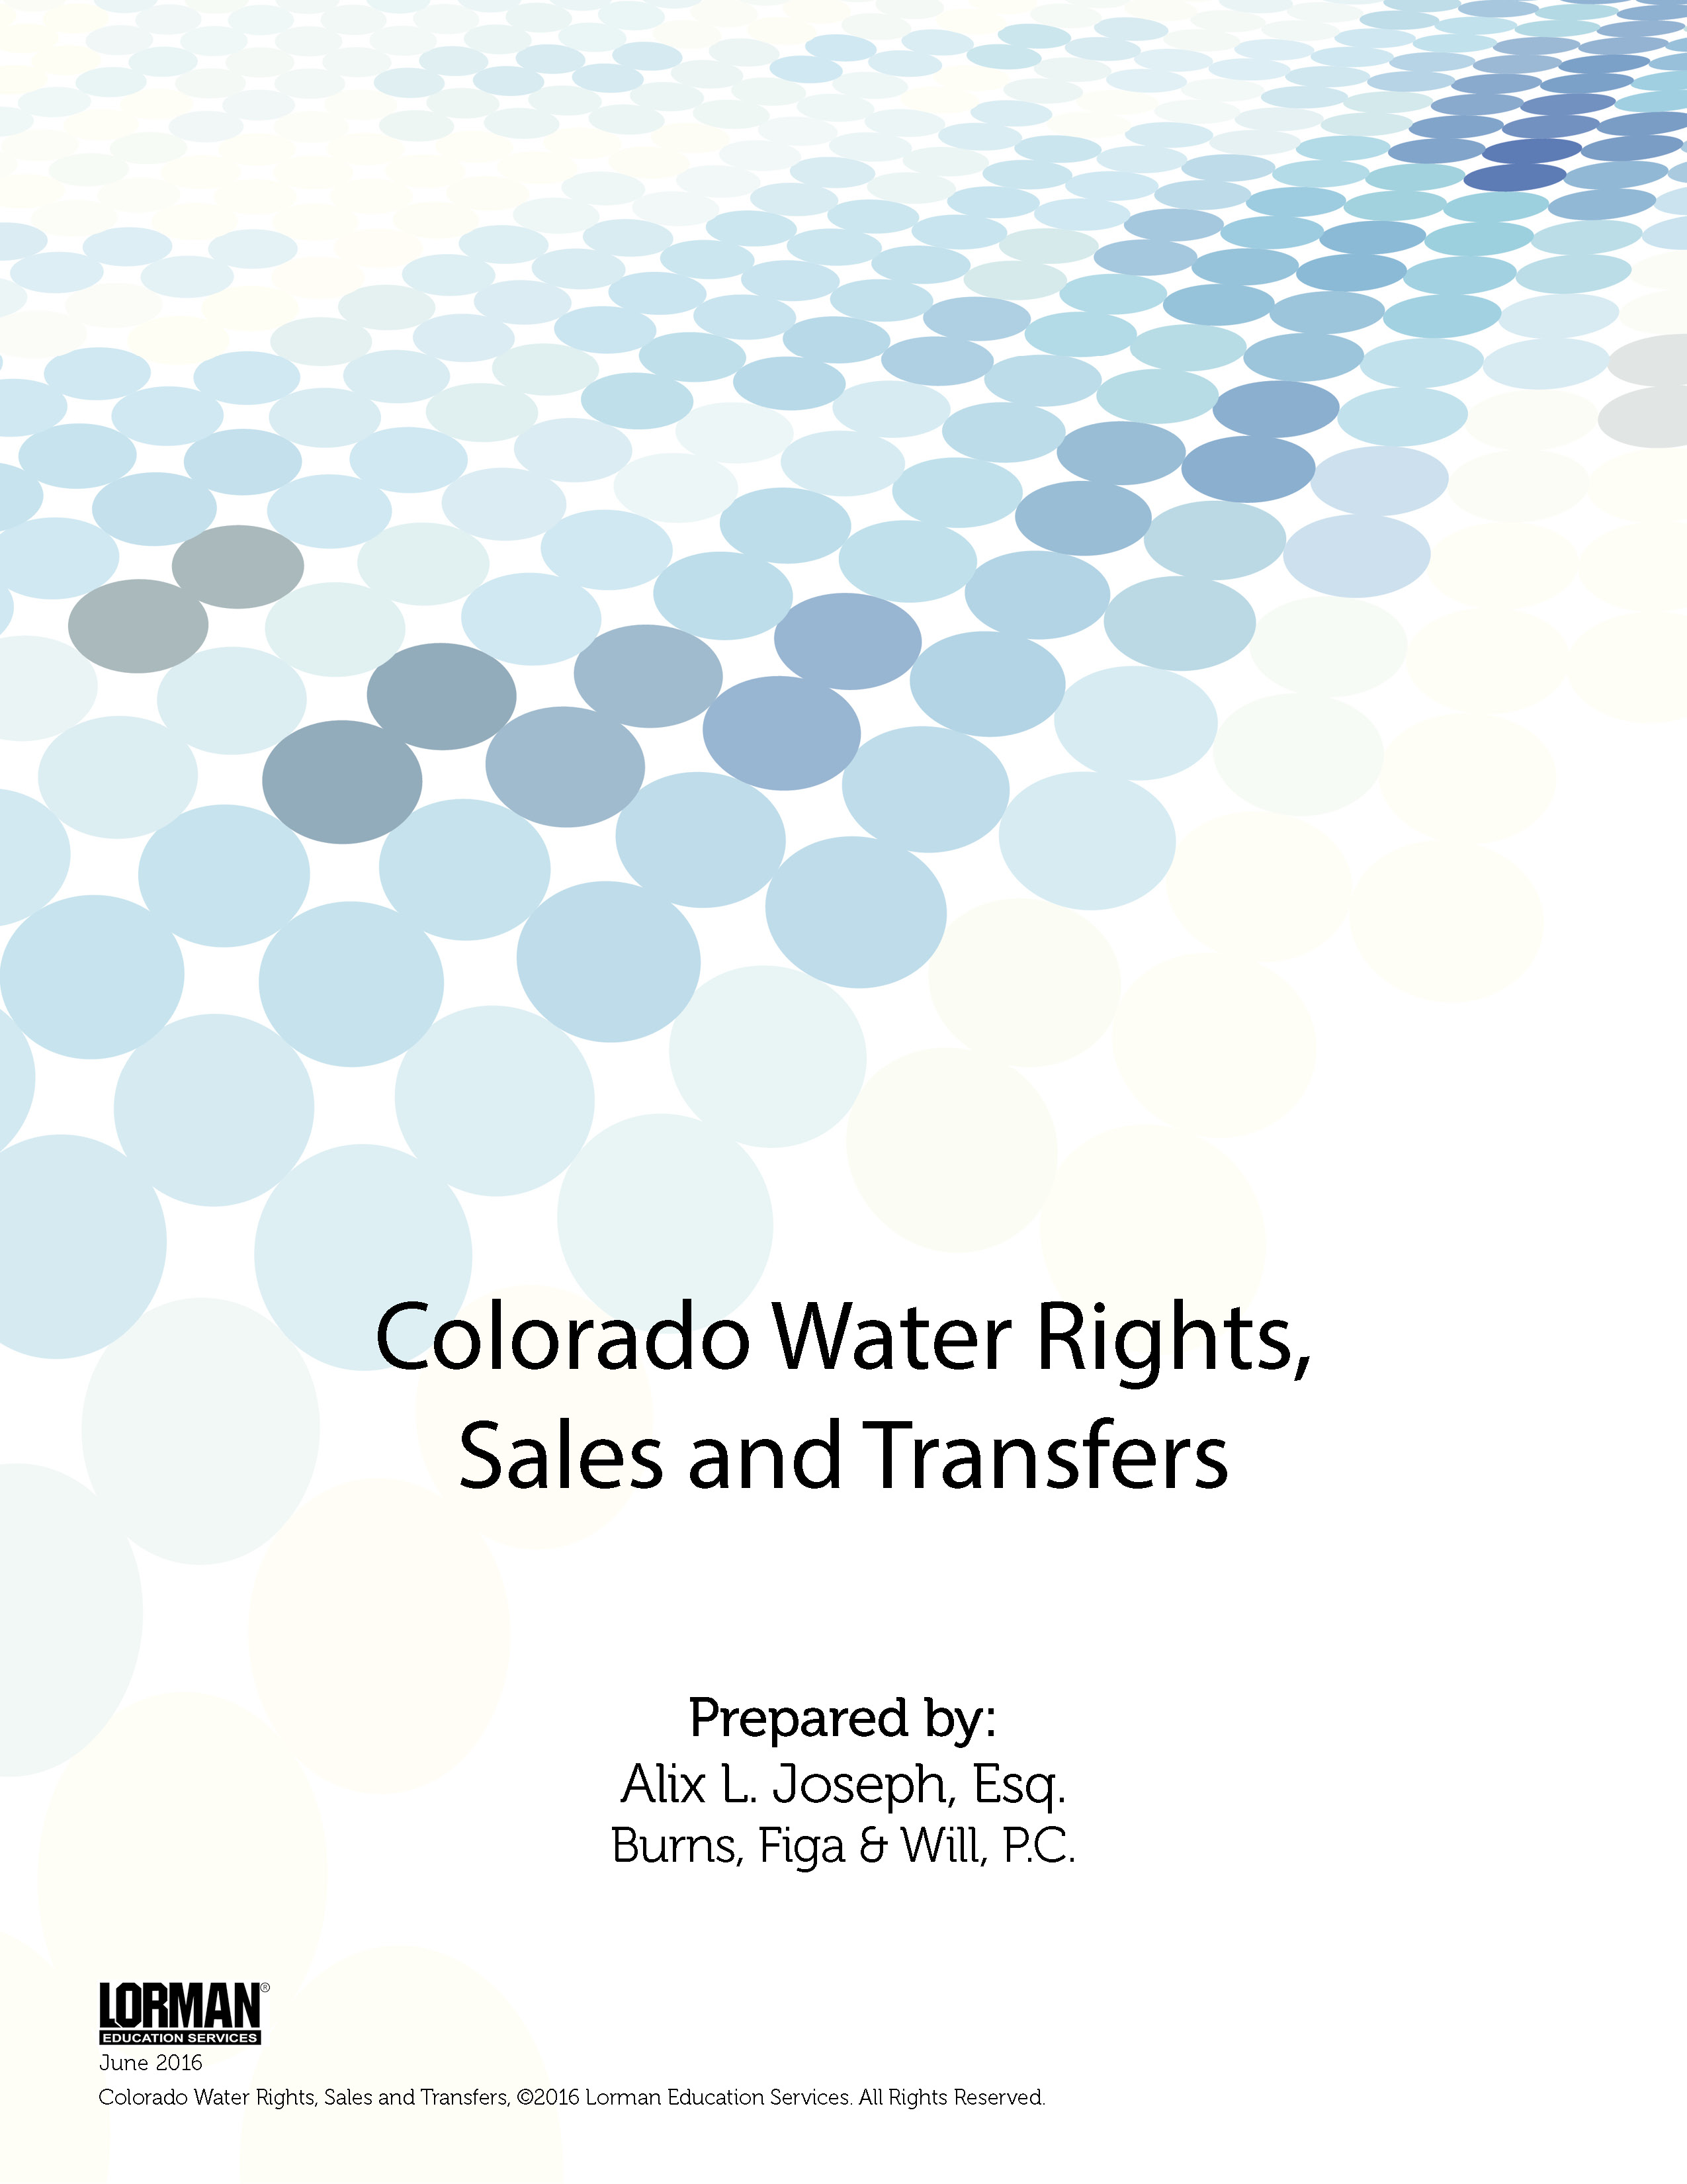 Colorado Water Rights, Sales and Transfers